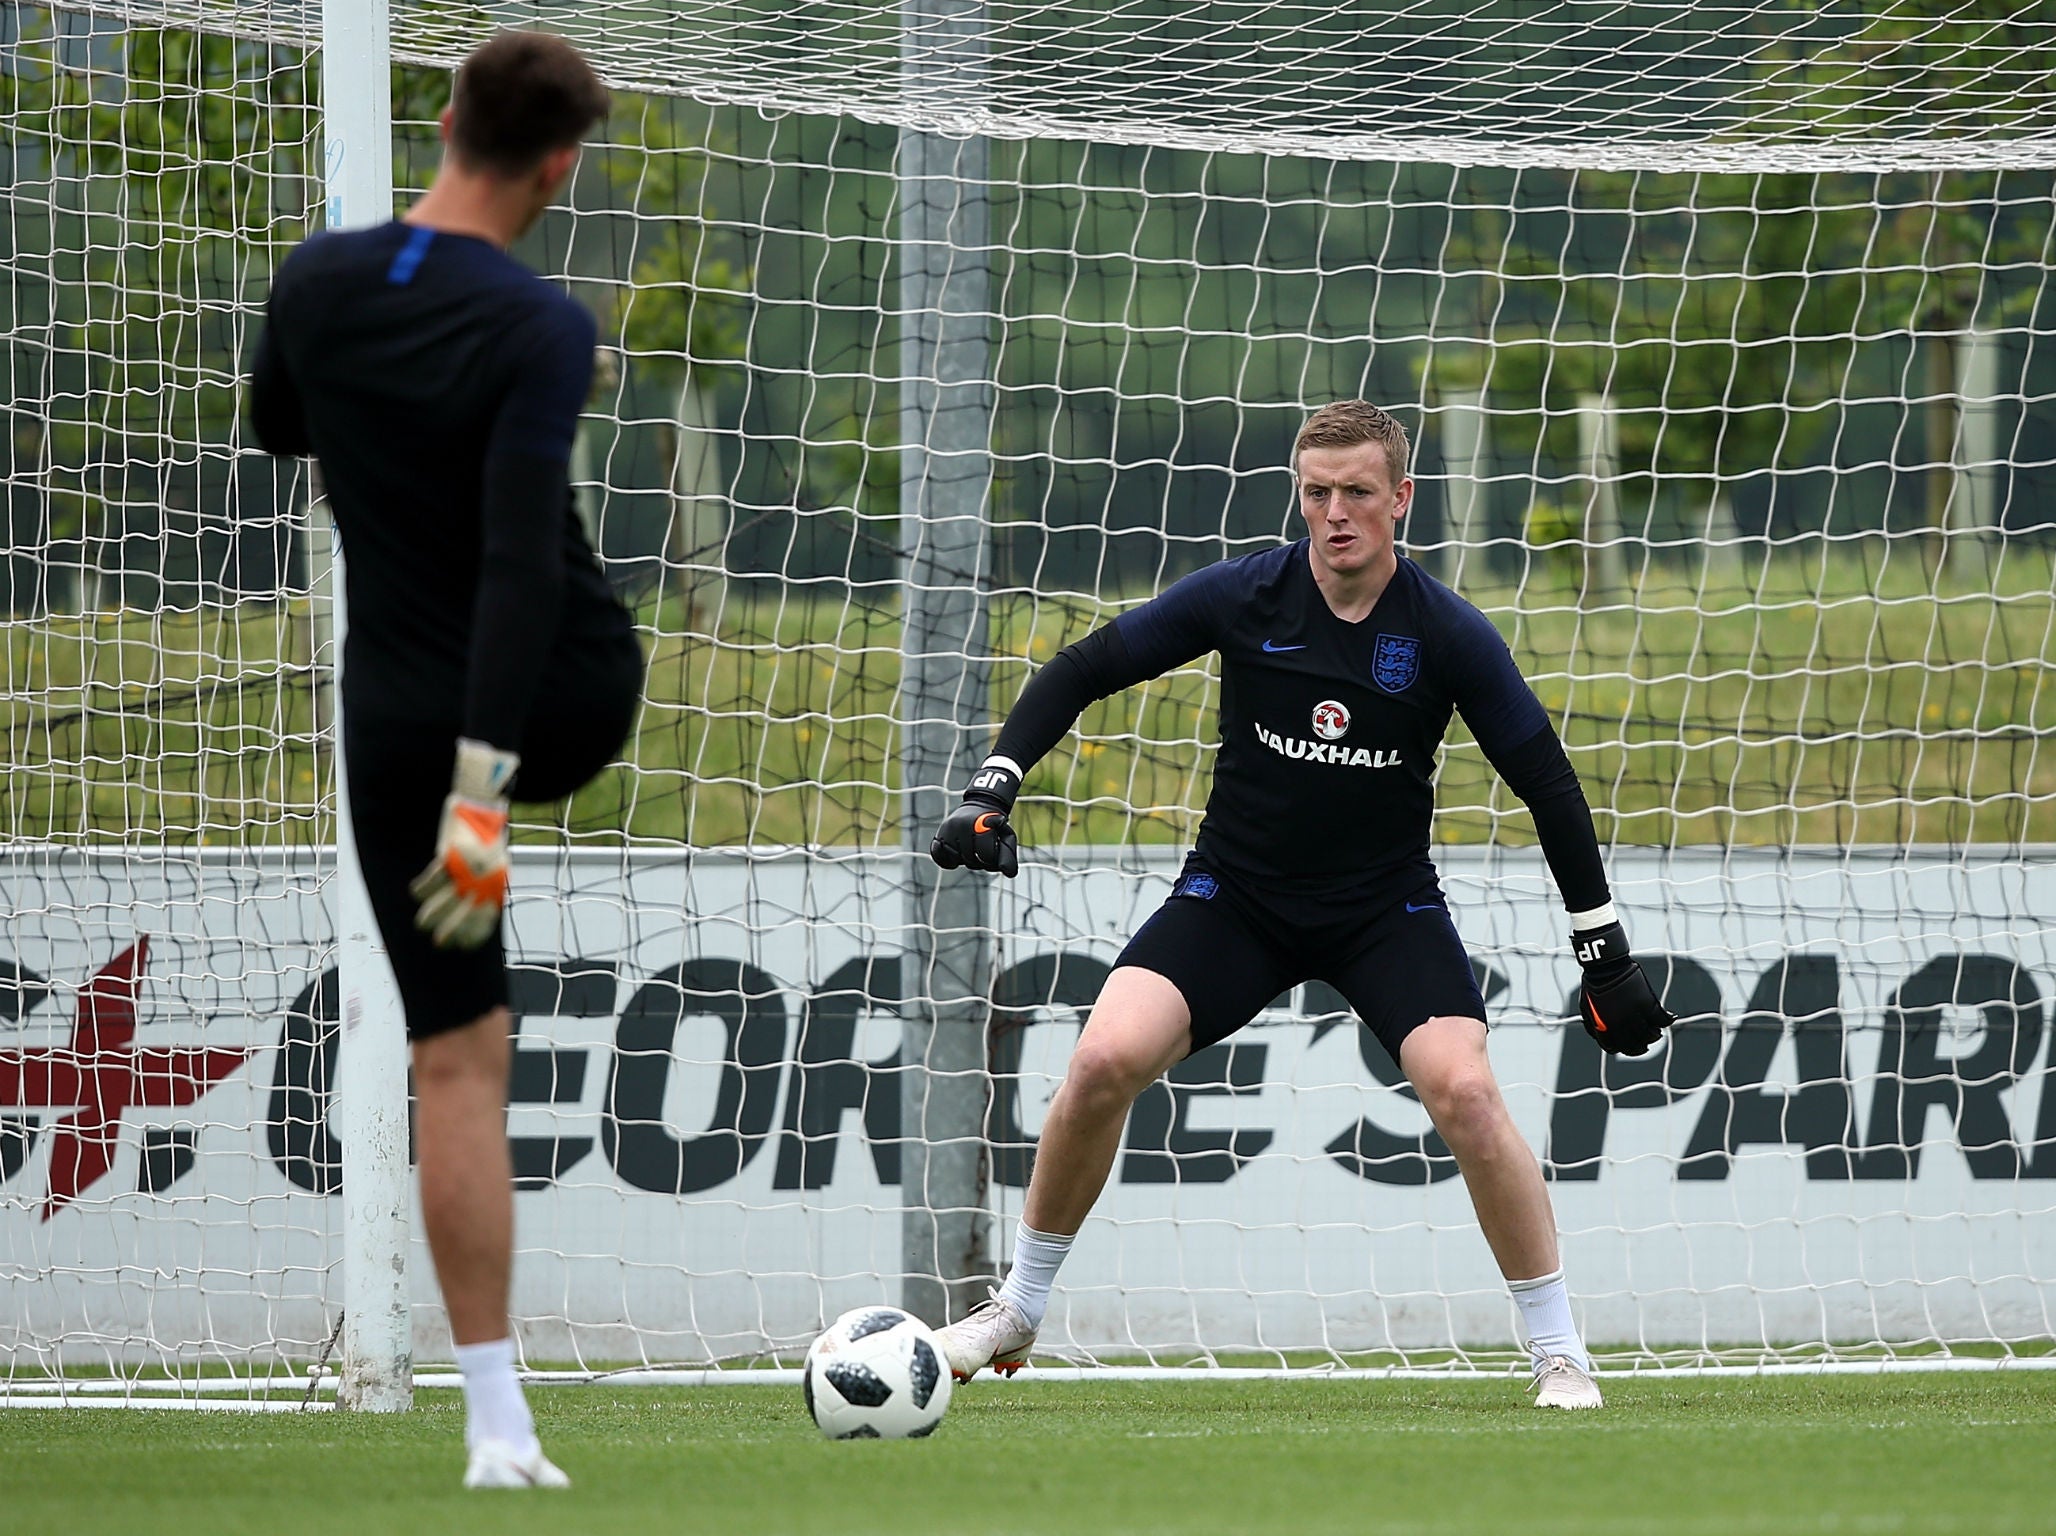 World Cup 2018: Jordan Pickford ready to step up and help end England&apos;s penalty shootout pain